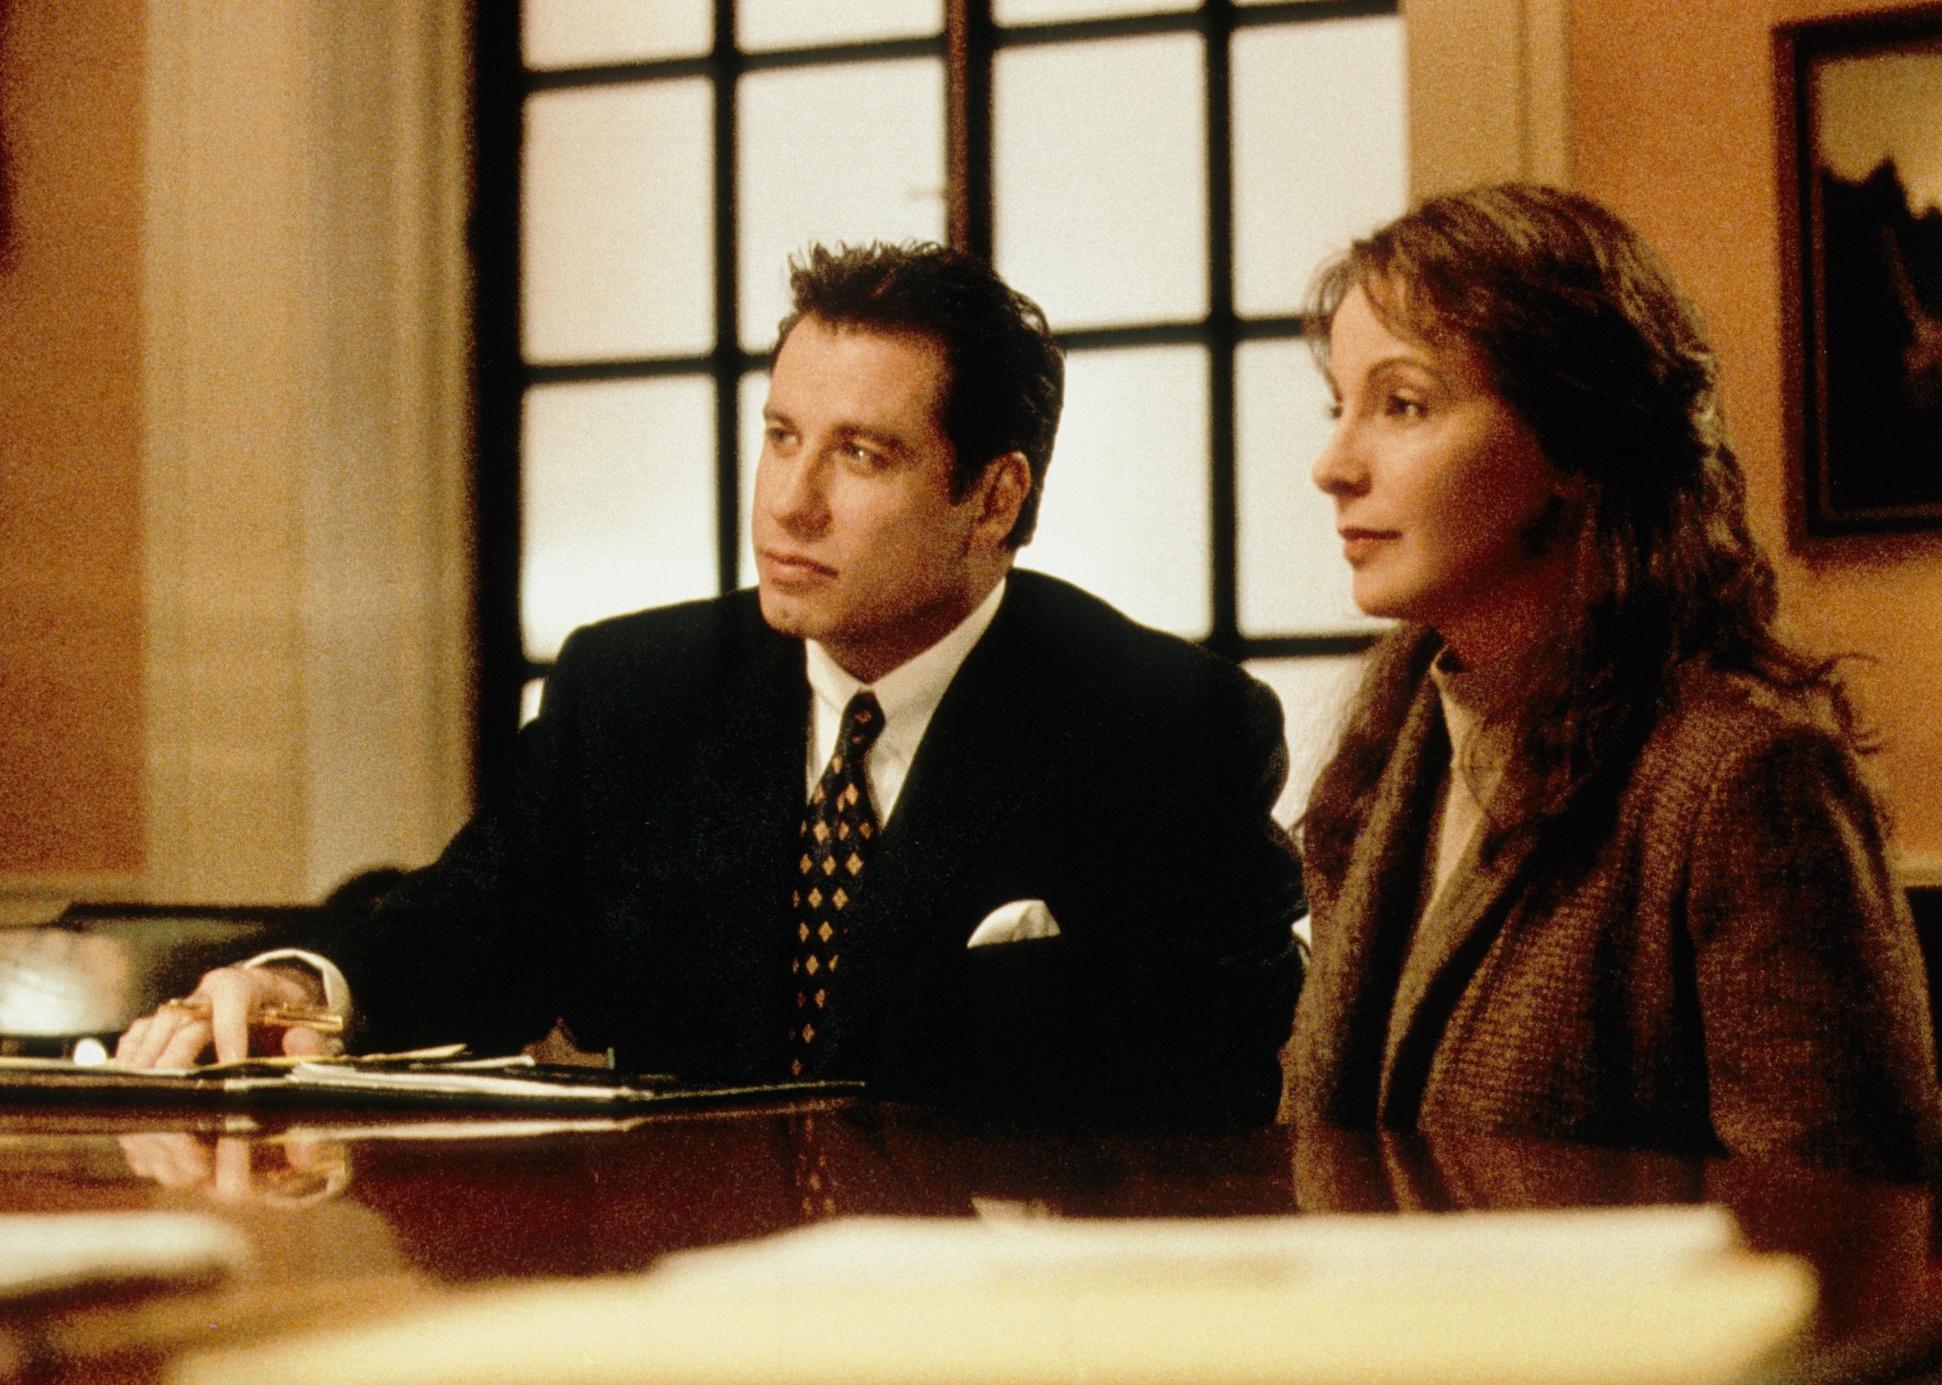 John Travolta in a suit talking to a woman in a coat inside a court room.